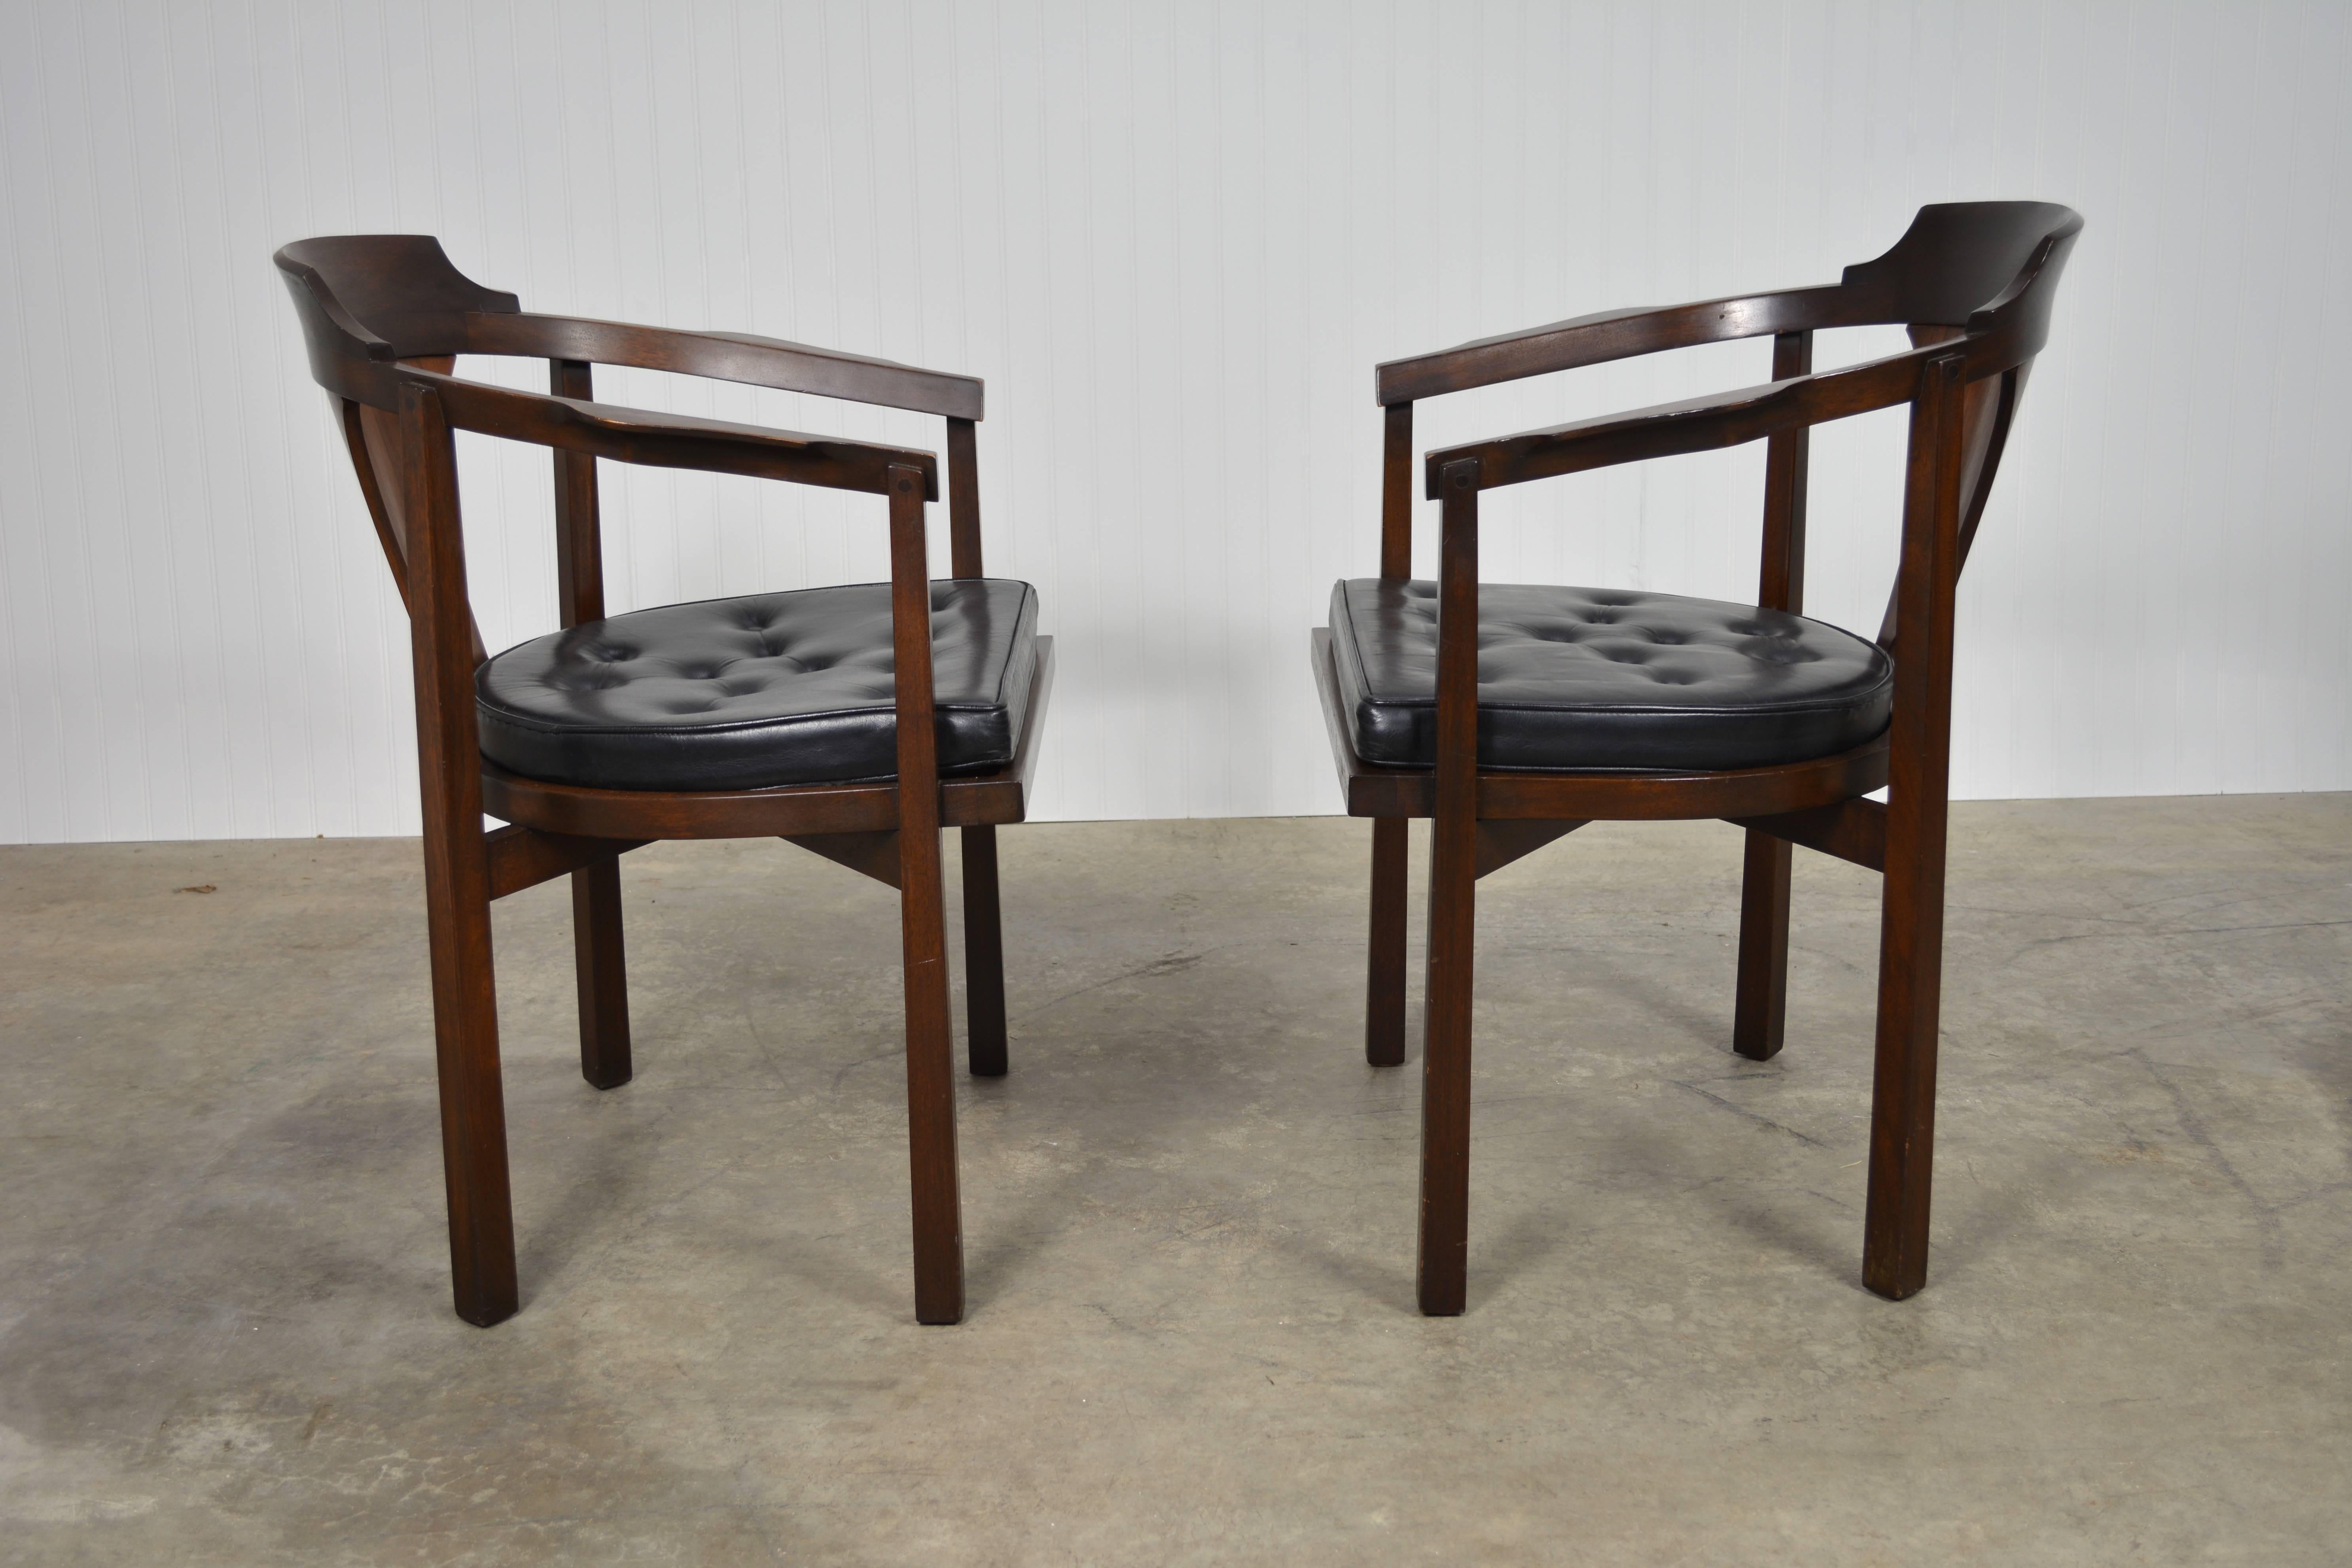 American Edward Wormley Pair of Horseshoe Chairs for Dunbar